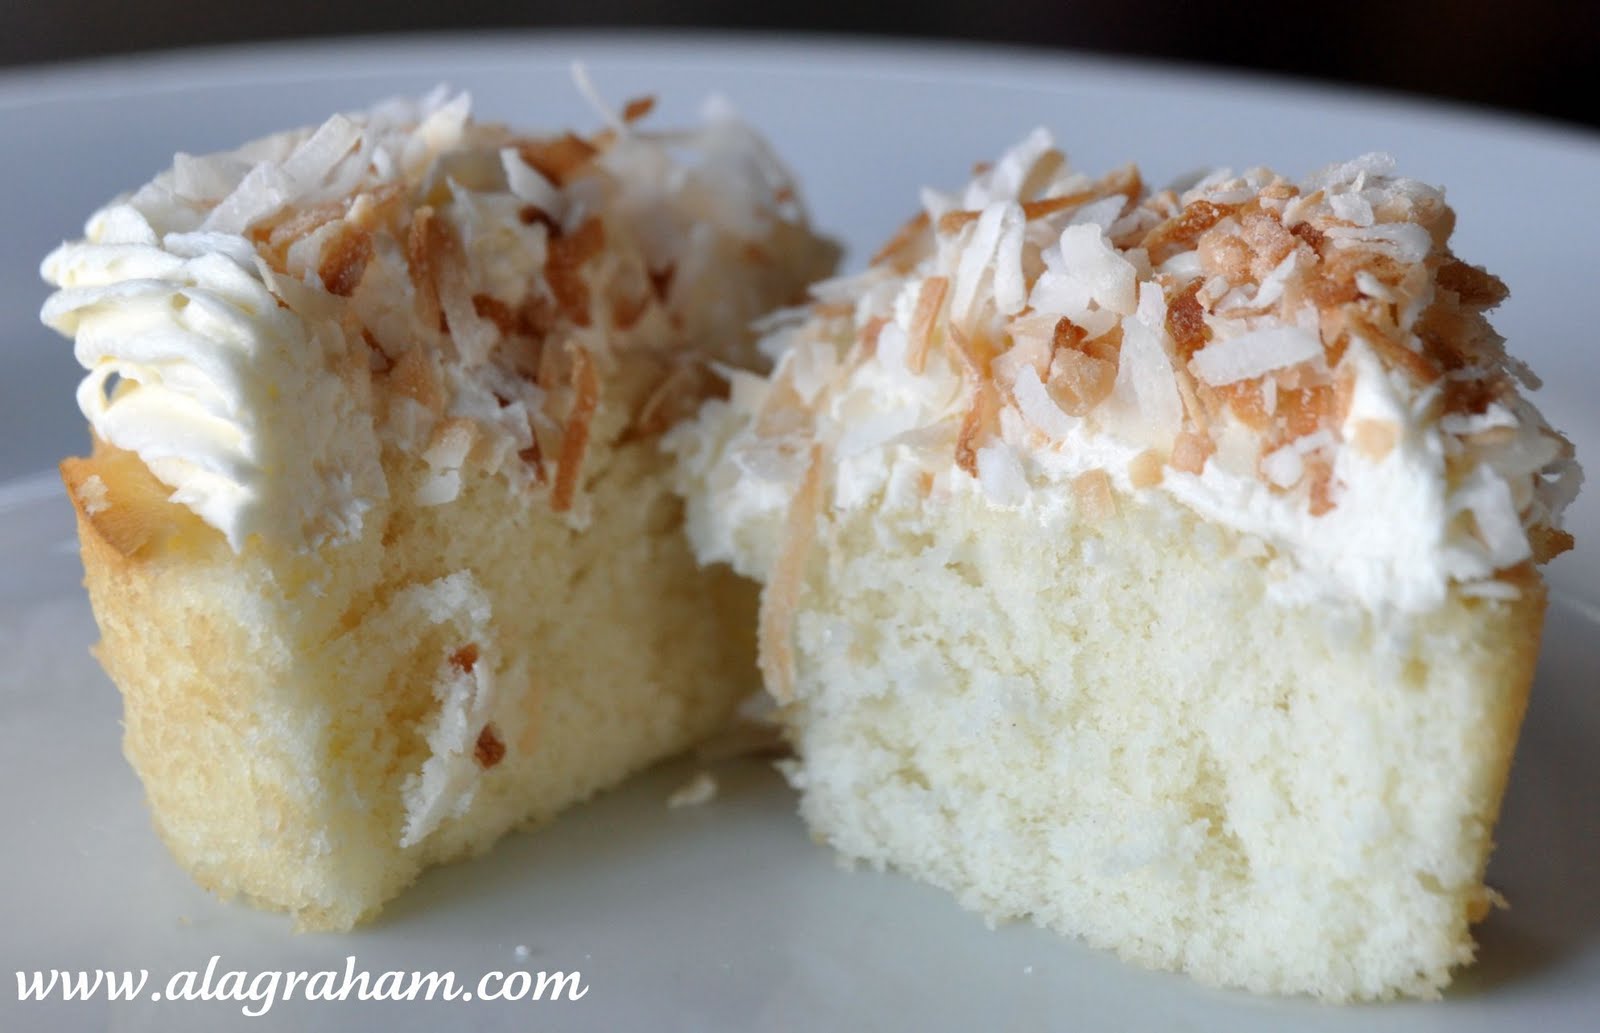 THE BEST COCONUT CAKE